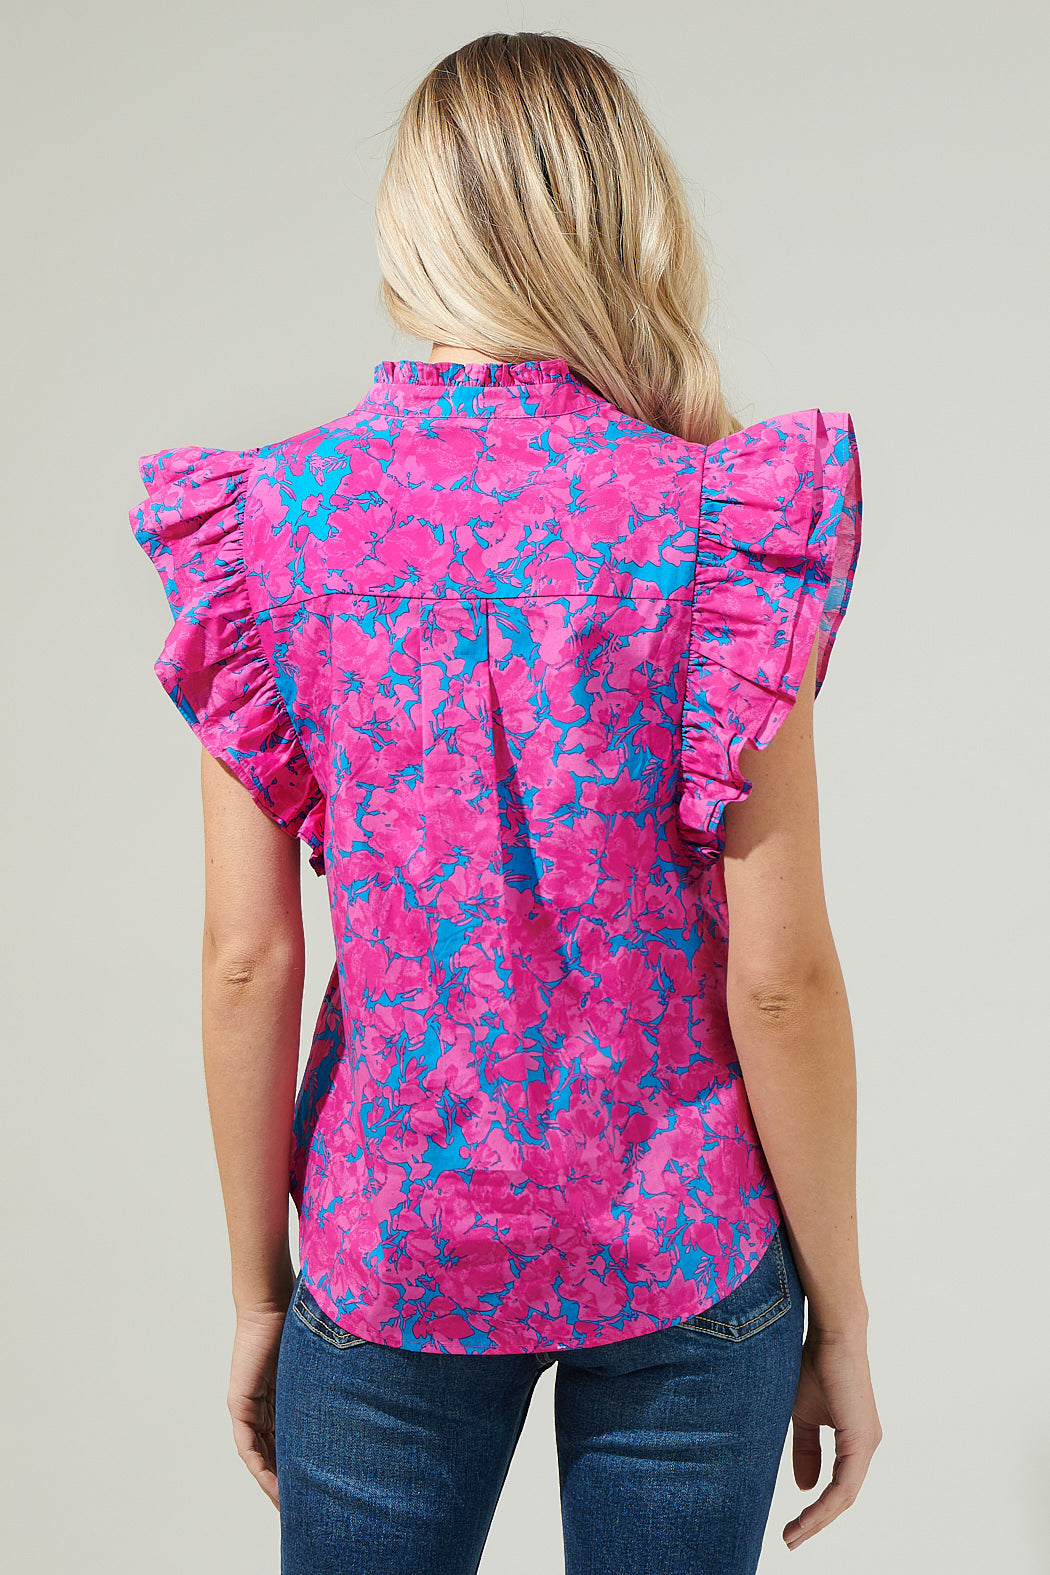 Dynamite Floral  Ruffle Top